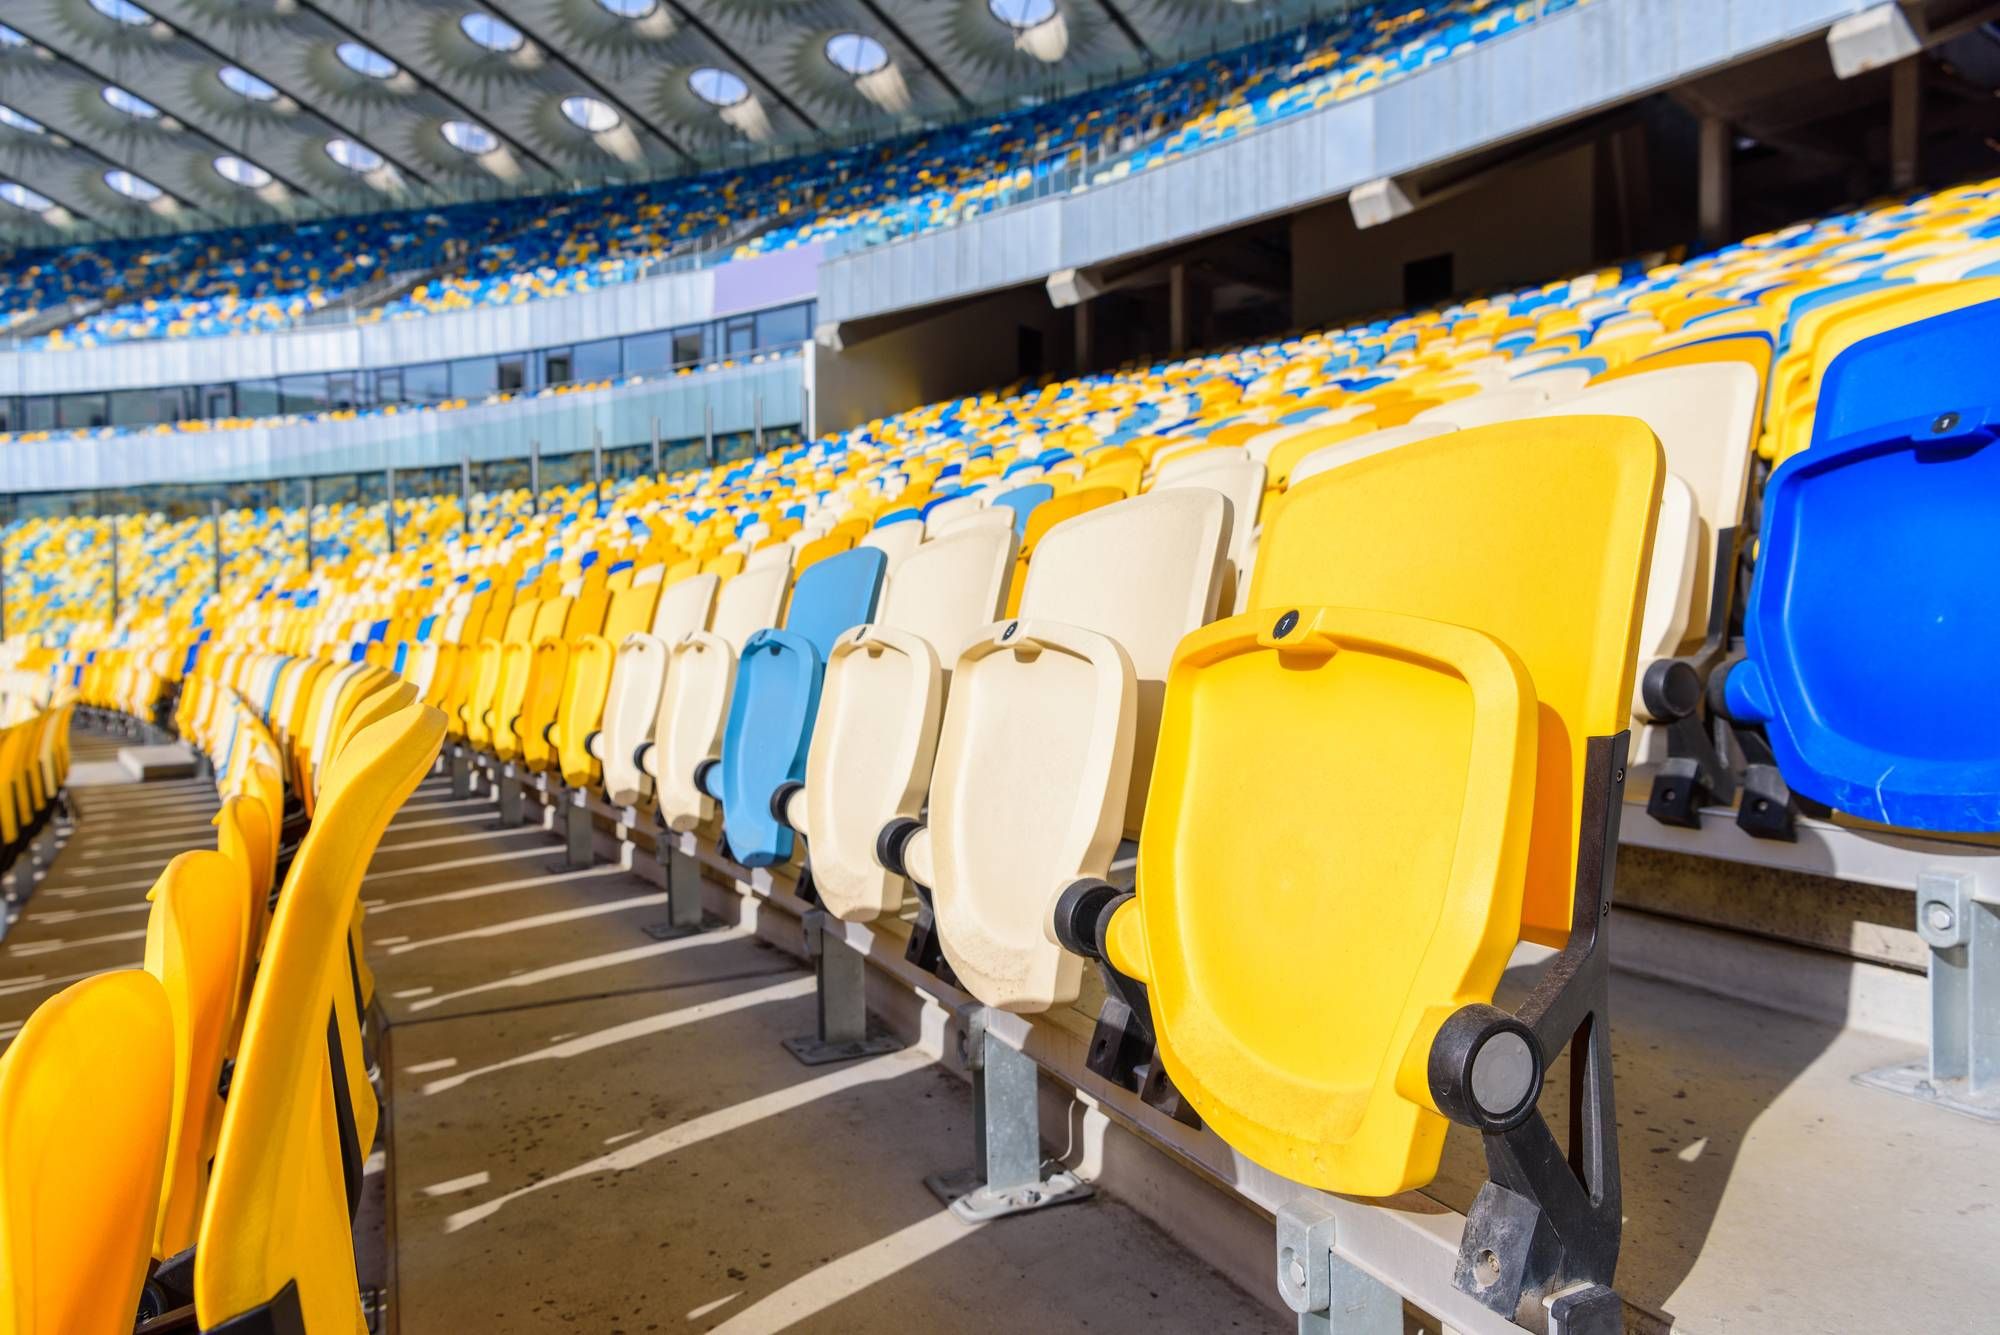 Vivid Seats has allegedly failed to refund consumers in light of the coronavirus outbreak.